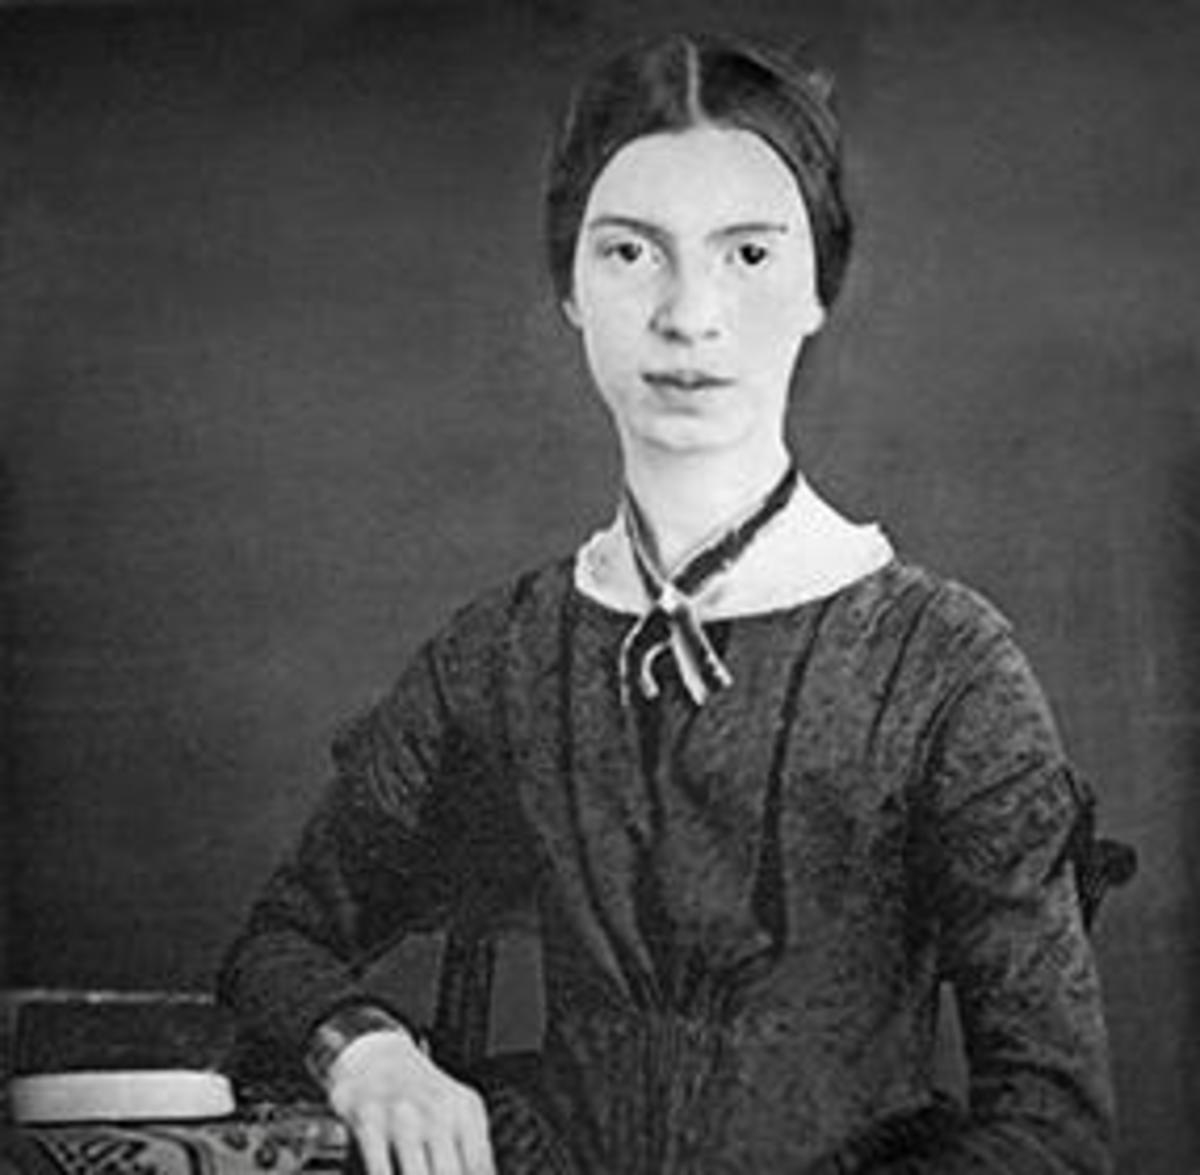 Analysis of the Poem 'As Imperceptibly As Grief' by Emily Dickinson